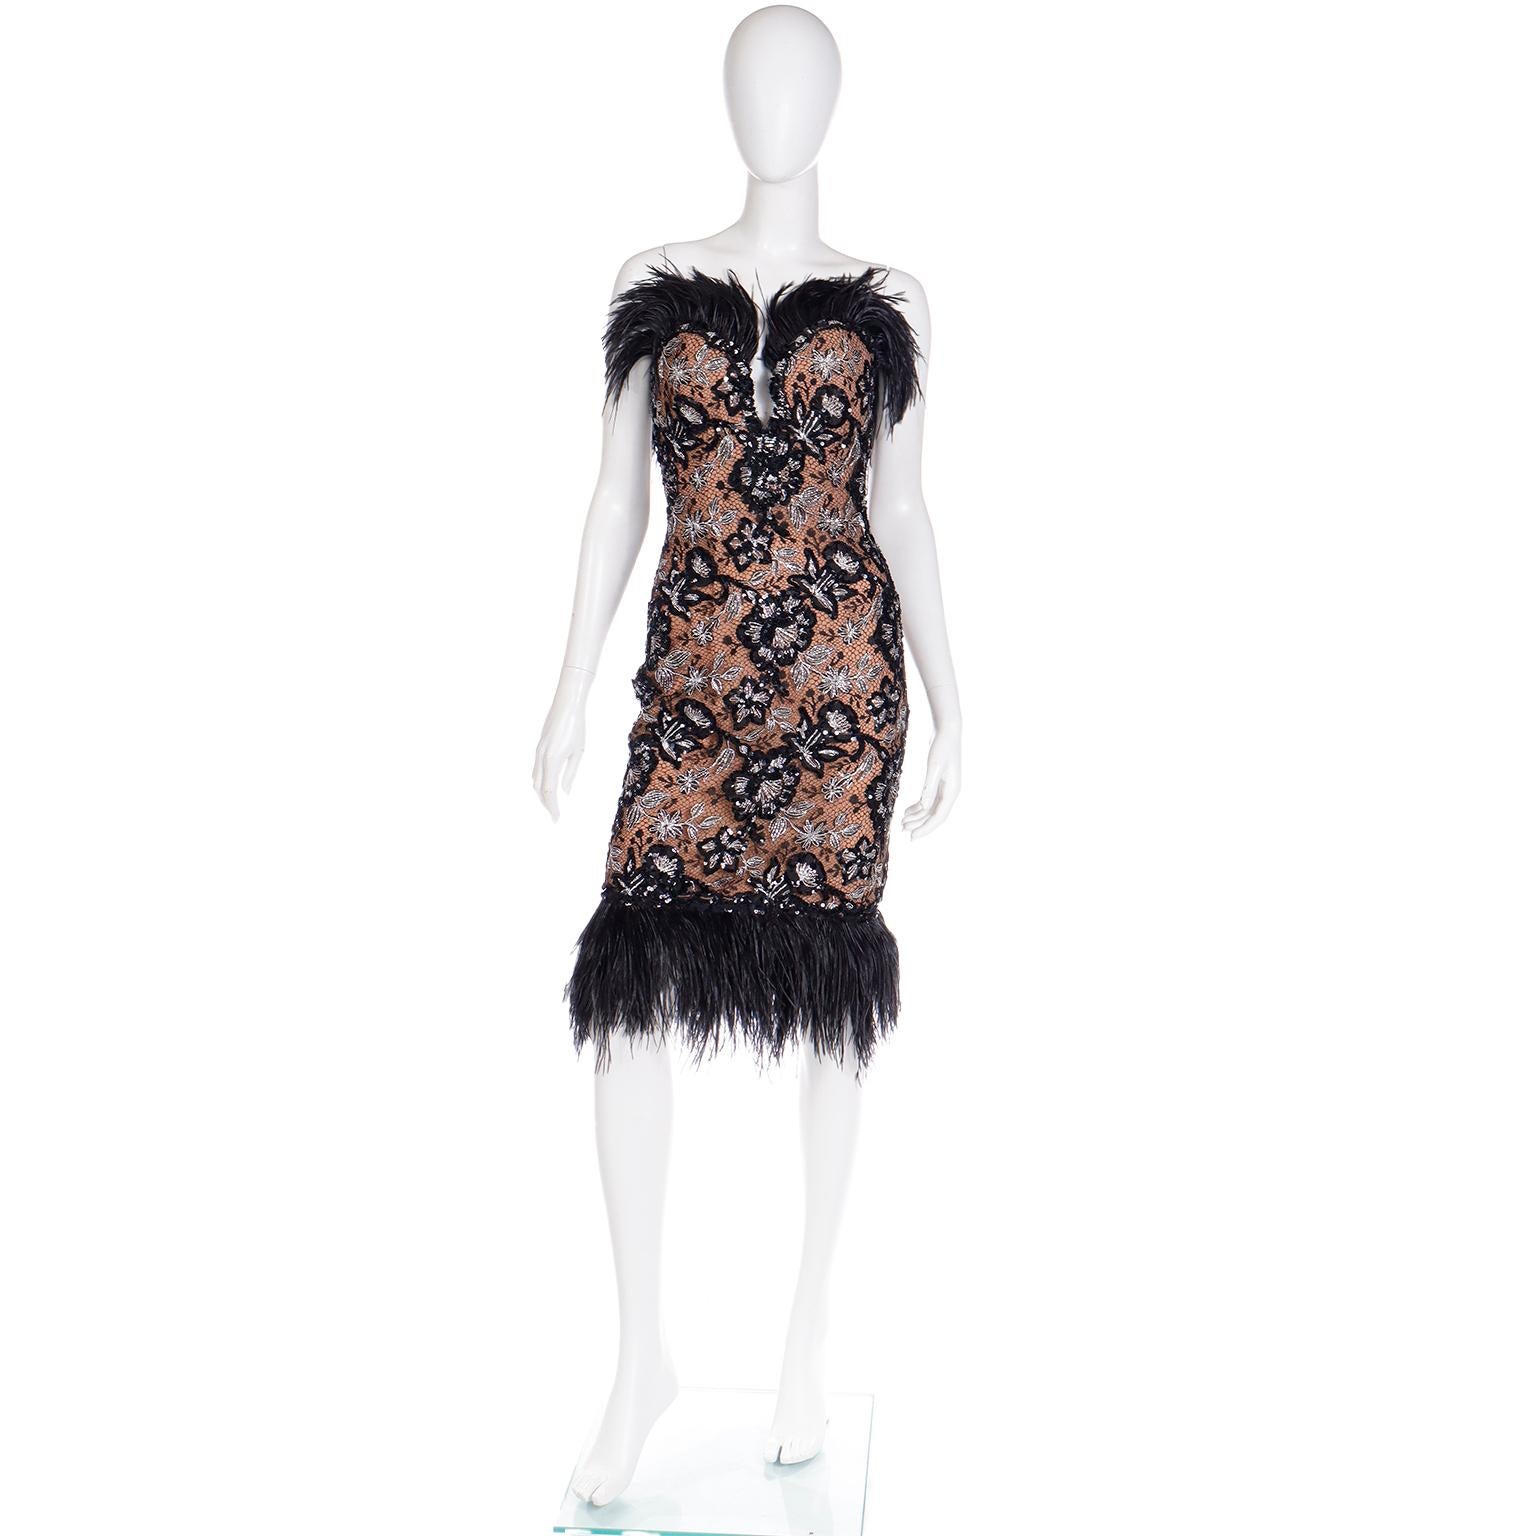 This is such a signature Bob Mackie dress with its sparkling sequins, silver metallic thread and gorgeous black feathers! This vintage Bob Mackie strapless dress was purchased at Saks Fifth Avenue in the 1980's. It's a perfect evening dress with its